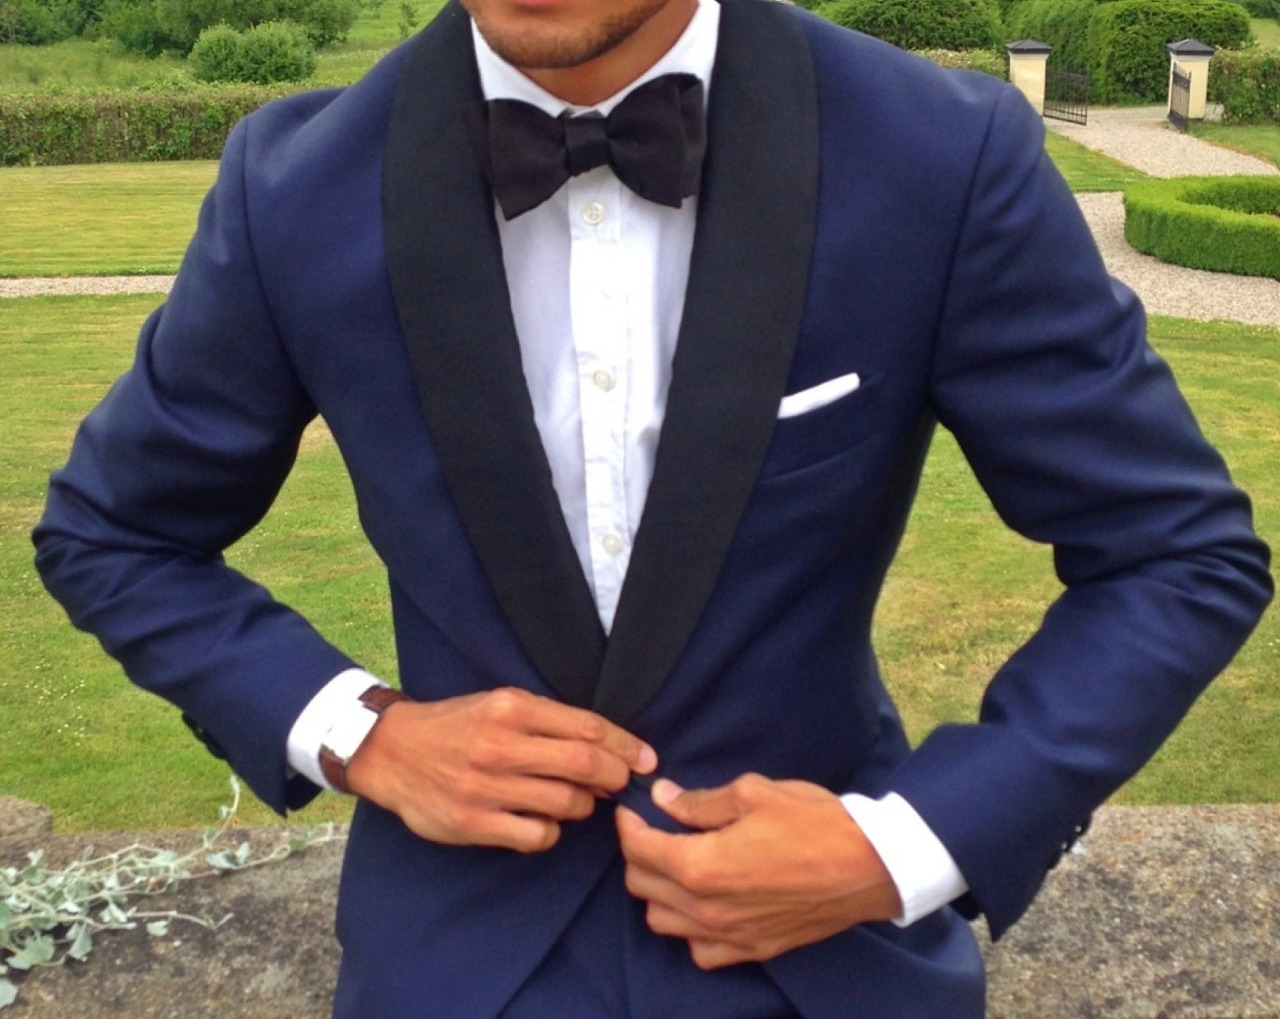 LOUIS-NICOLAS DARBON — This weekend I wore Midnight blue tuxedo by